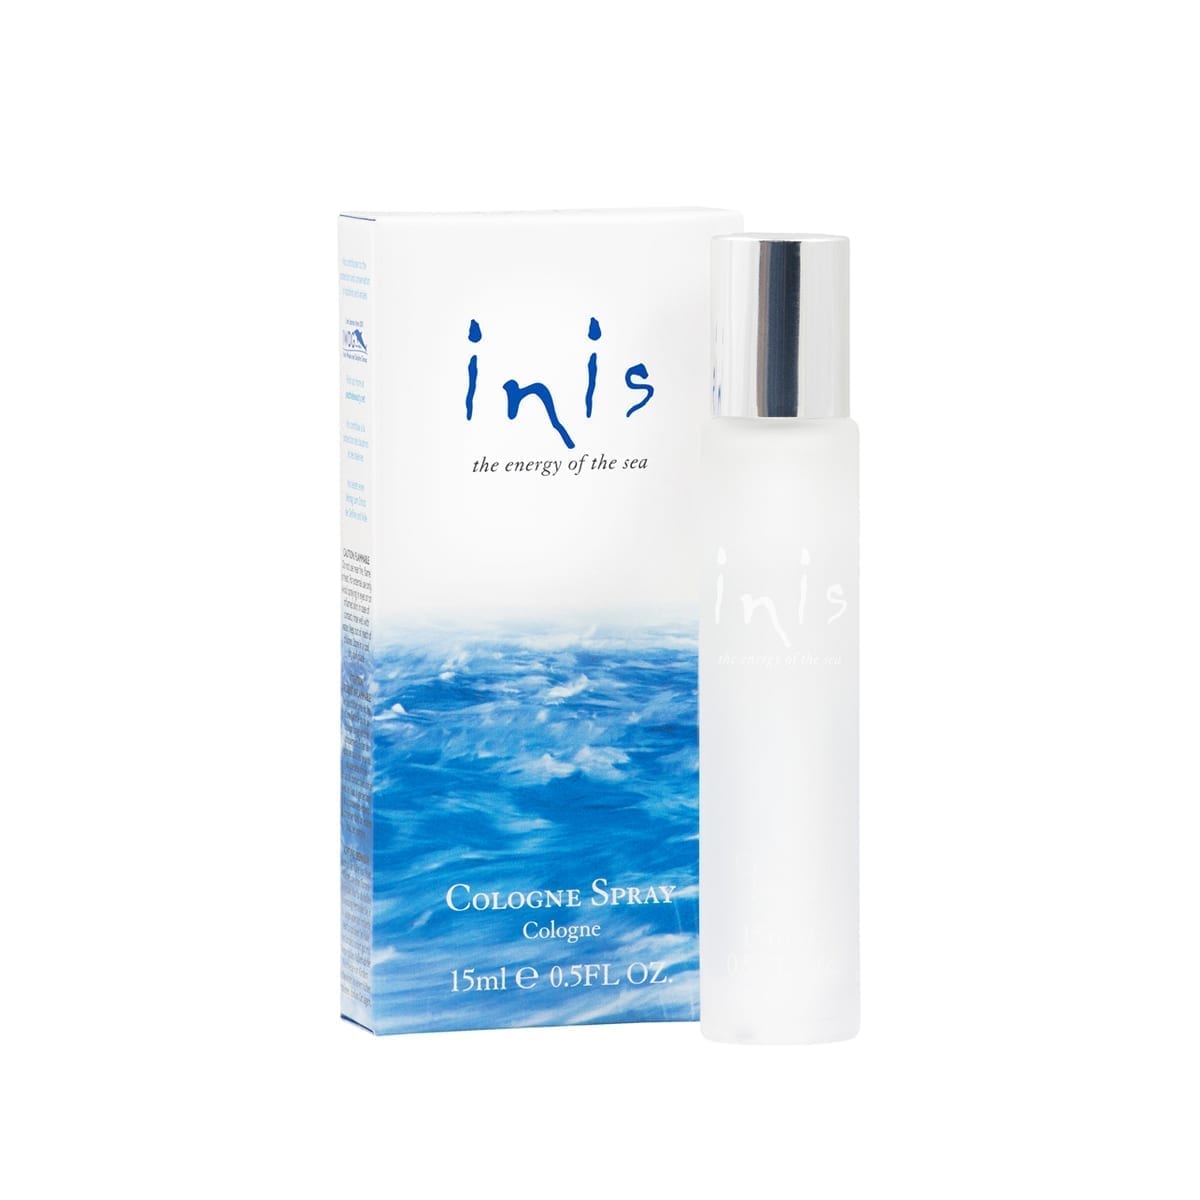 inis travel size cologne spray